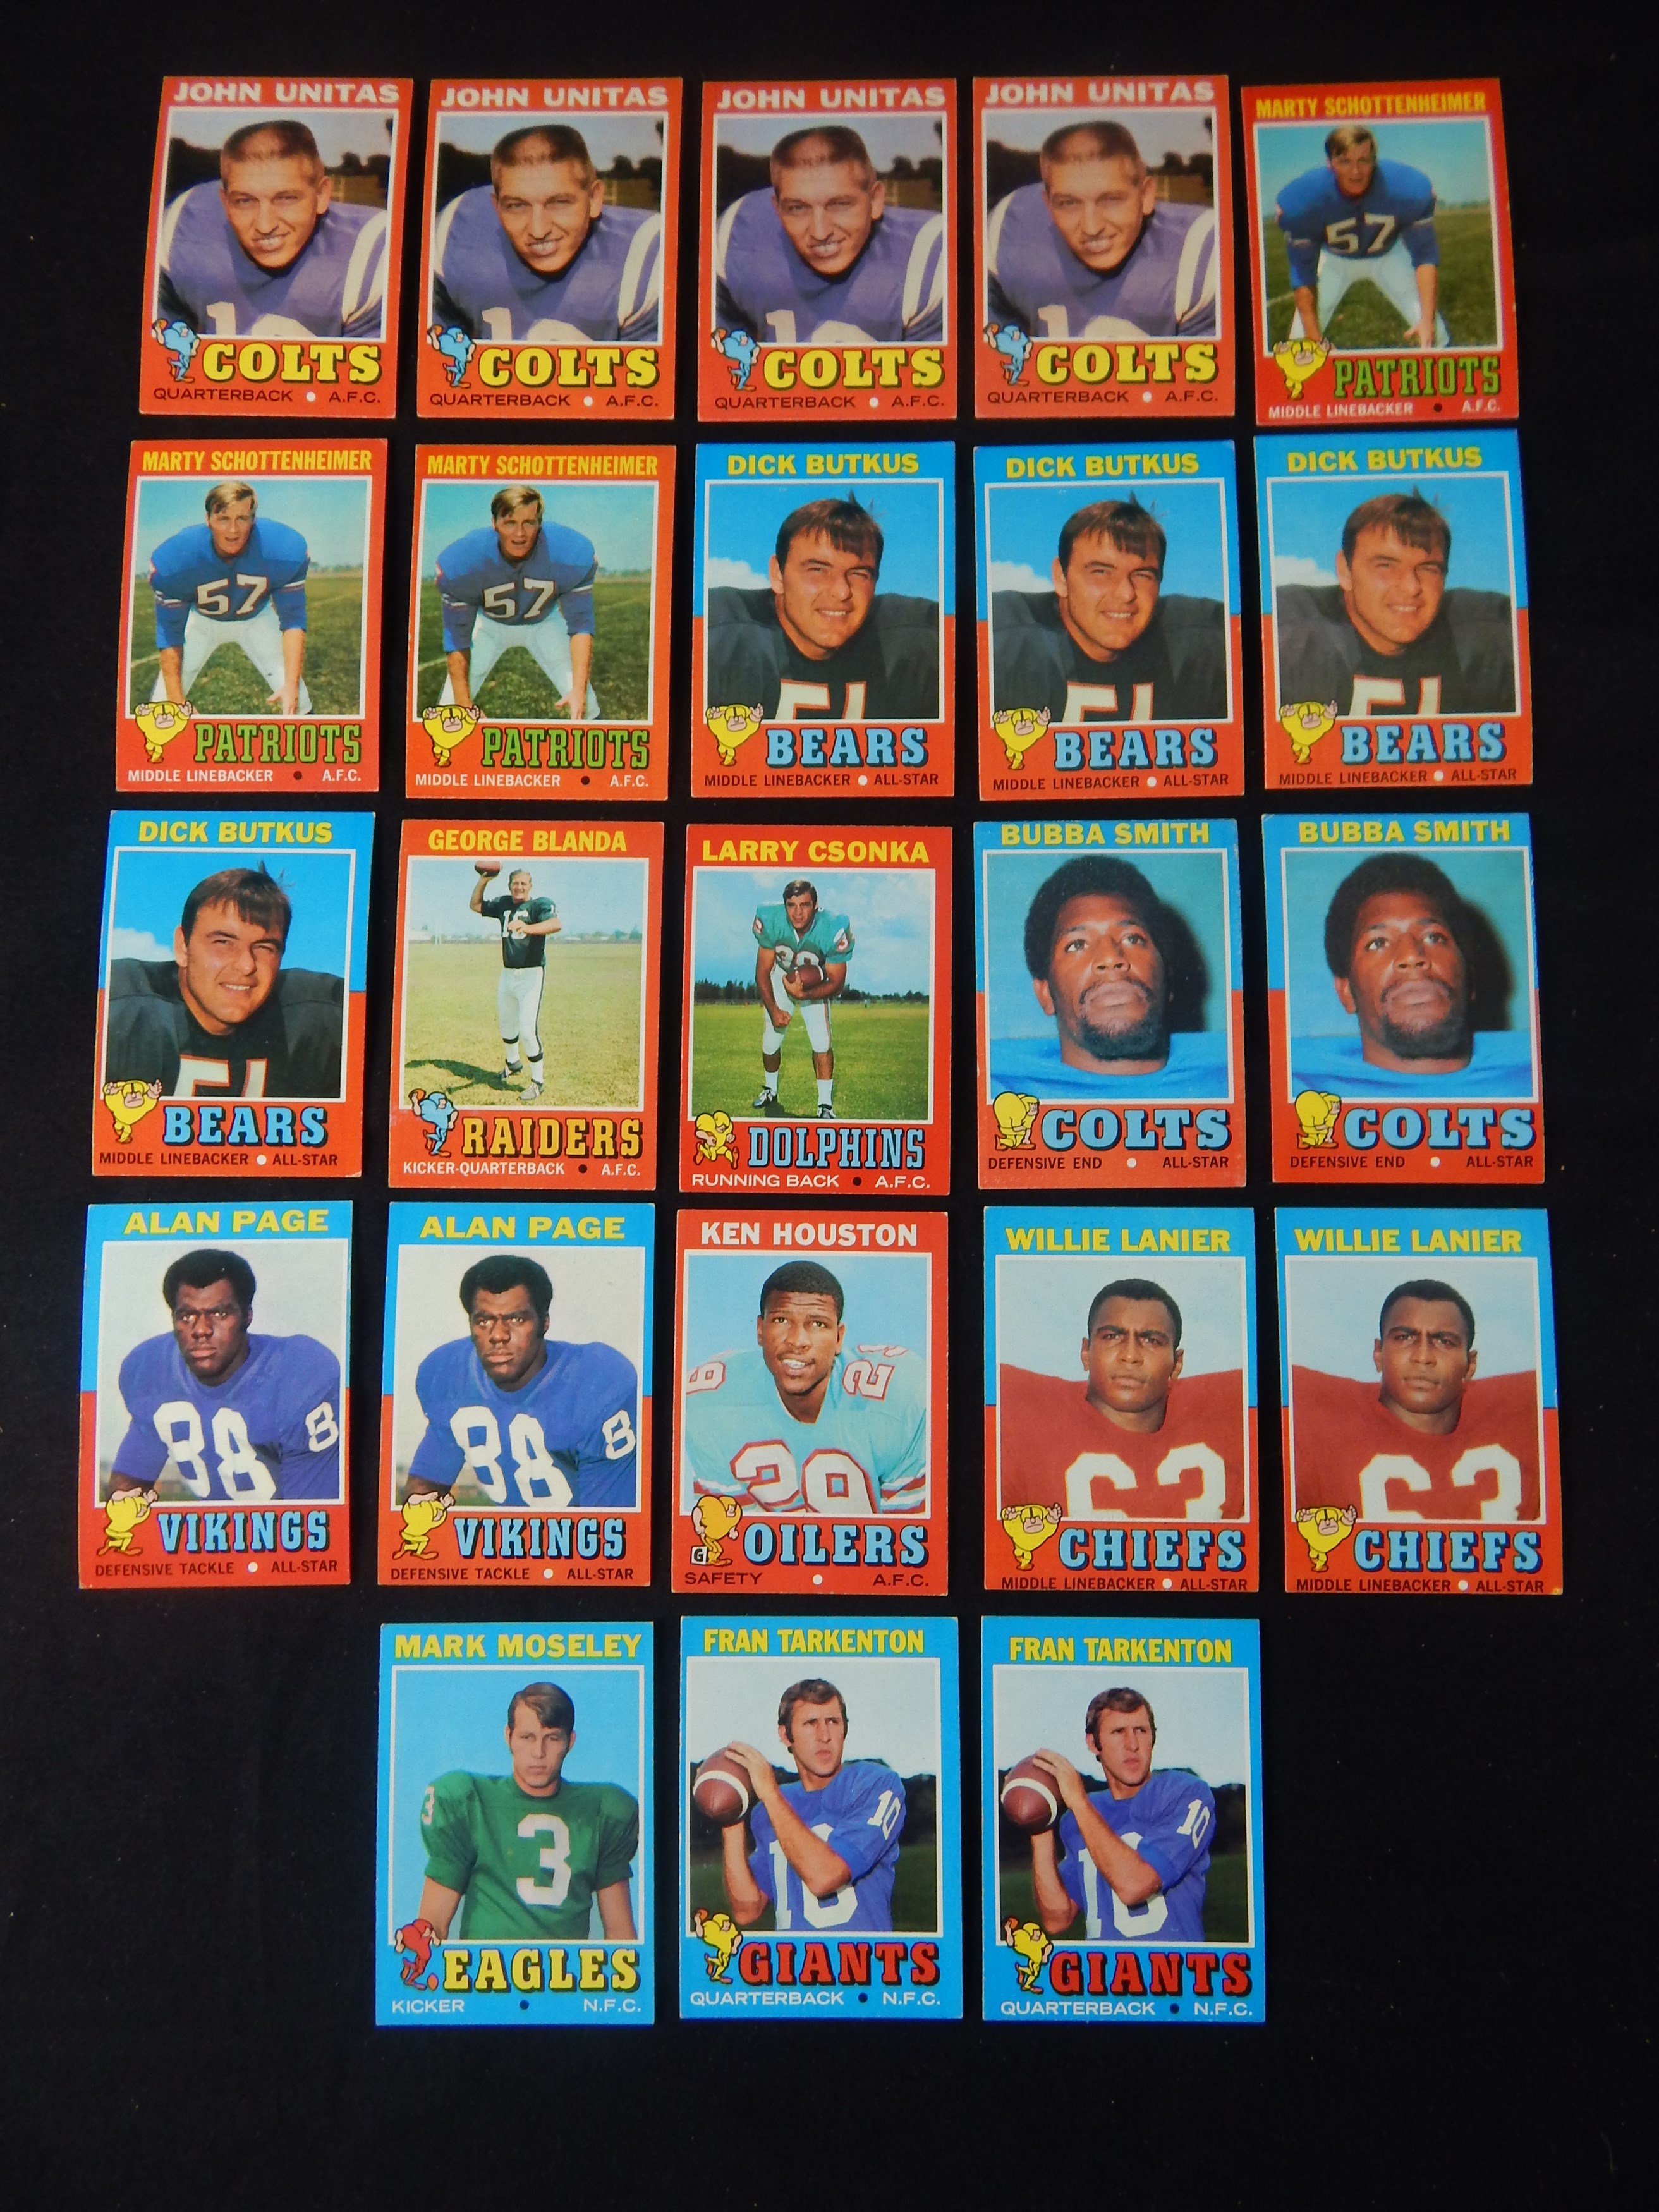 Baseball and Trading Cards - 1971 Topps FOOTBALL Collection of 300 with Stars